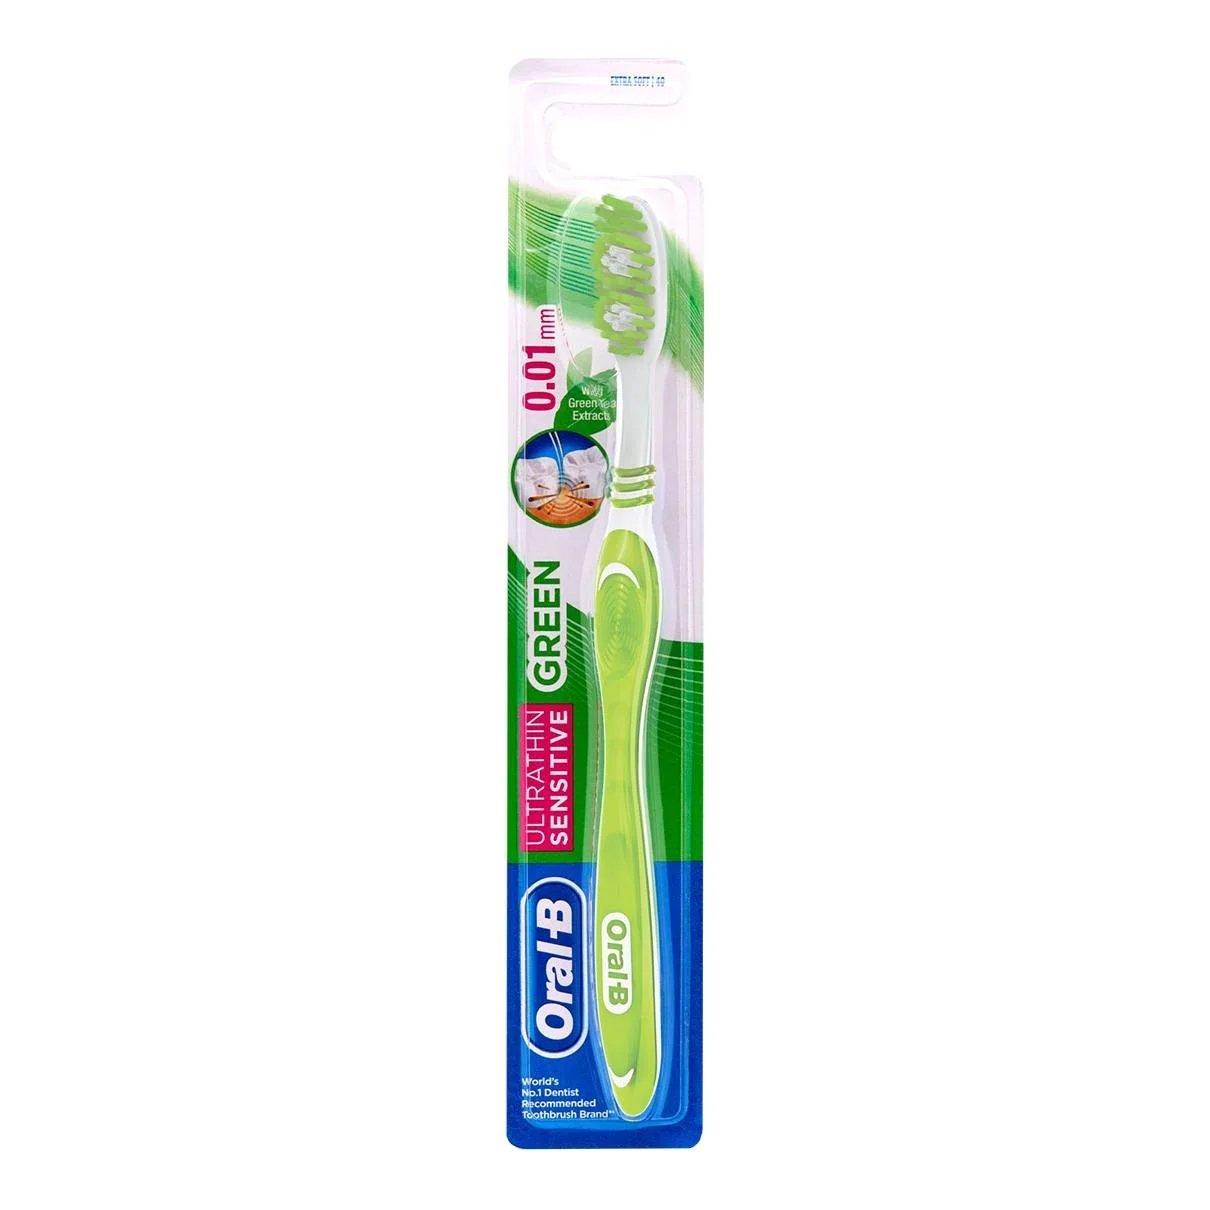 Oral-B Ultrathin Sensitive (Green) Manual Toothbrush undefined